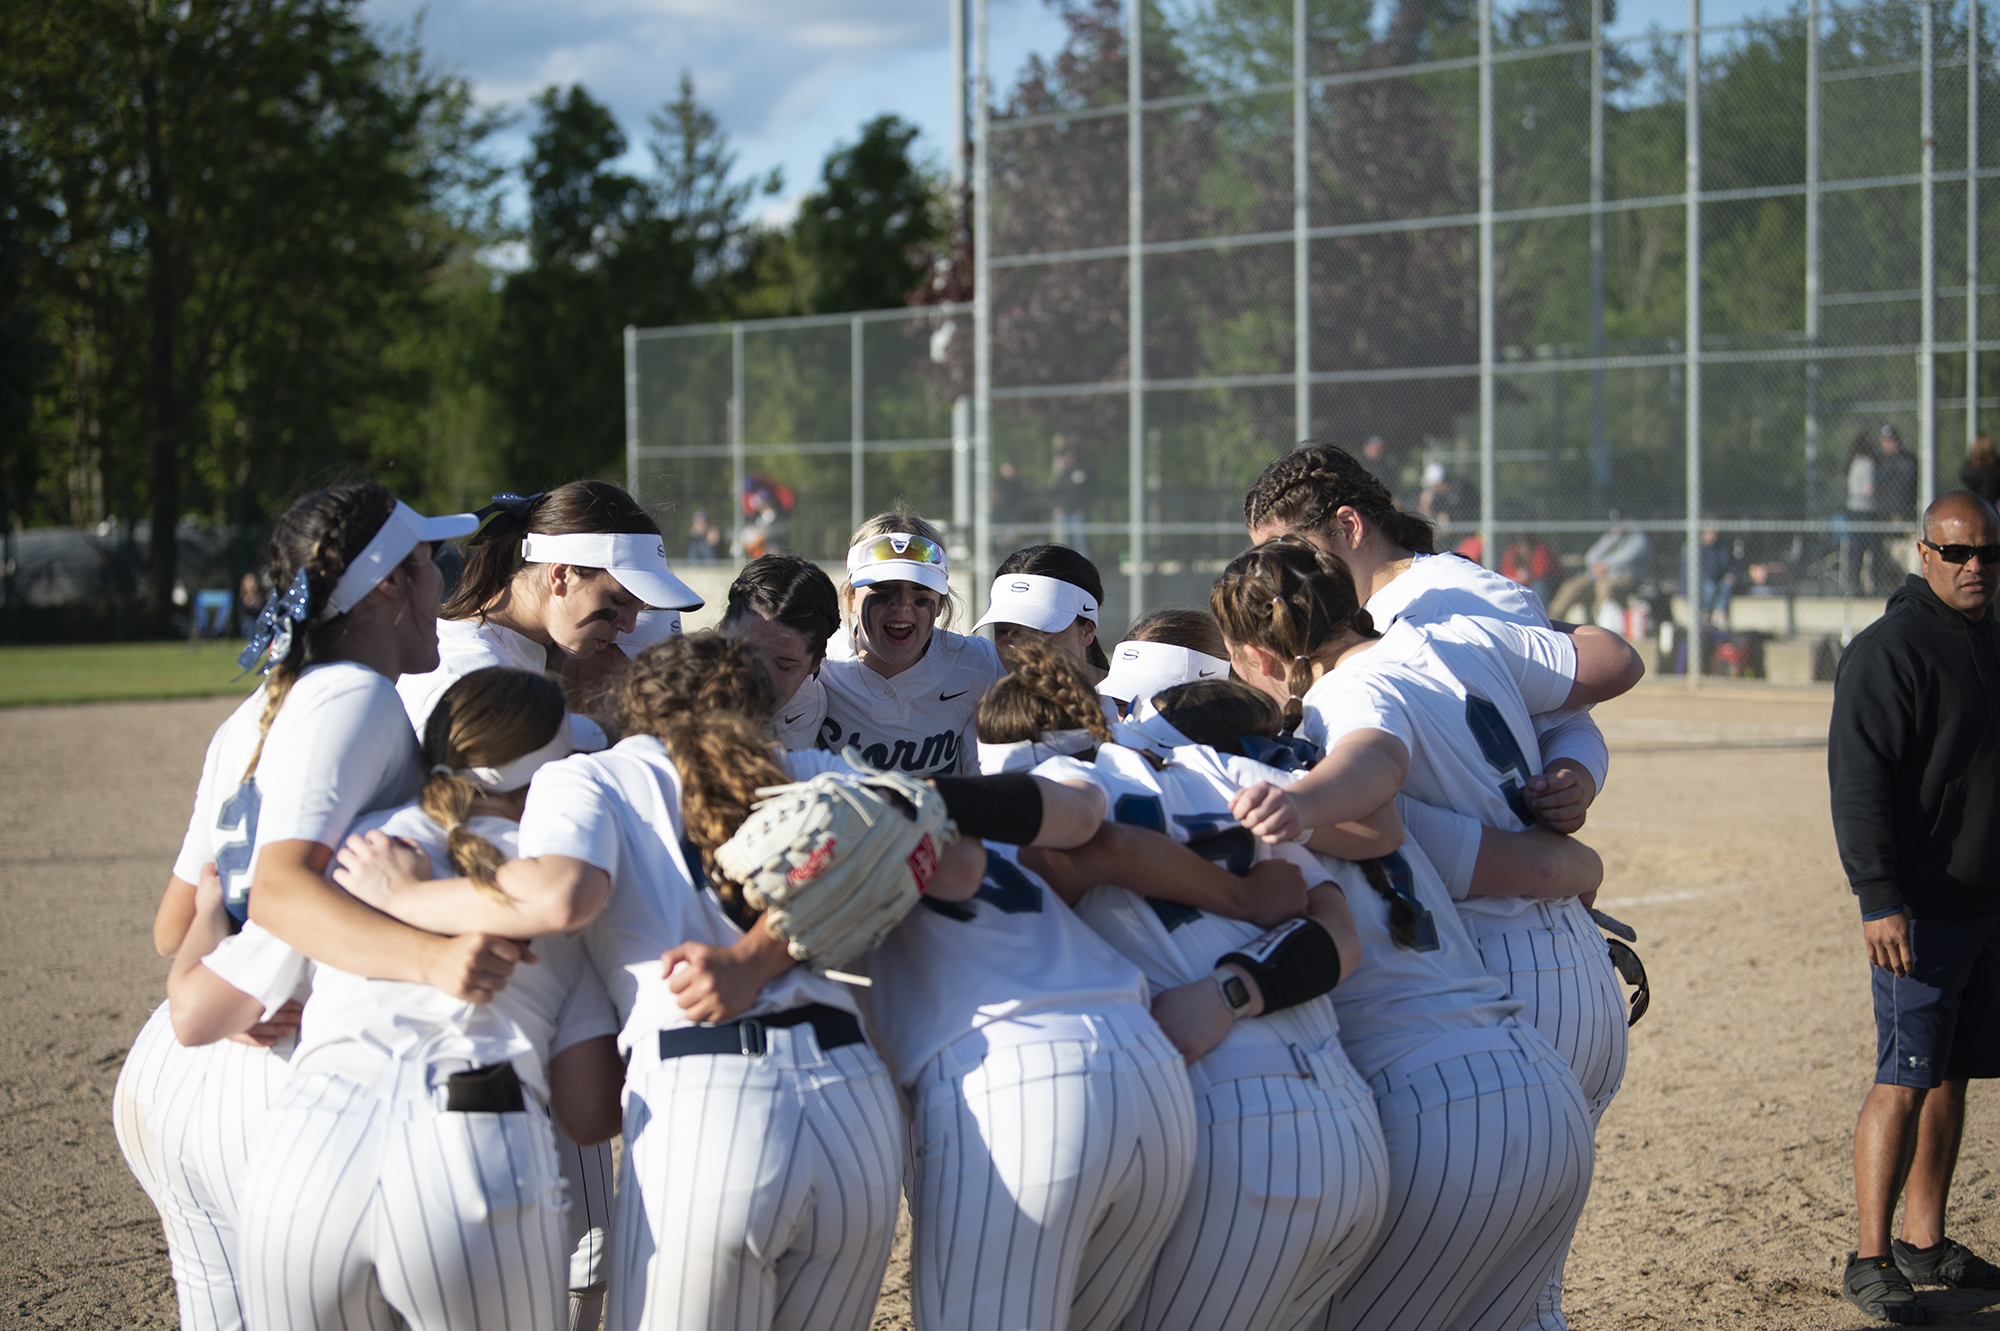 The Skyview softball team celebrates after clinching a state berth with an 8-2 win over Sumner in the 4A bi-district softball tournament in Auburn on Friday, May 20, 2022.